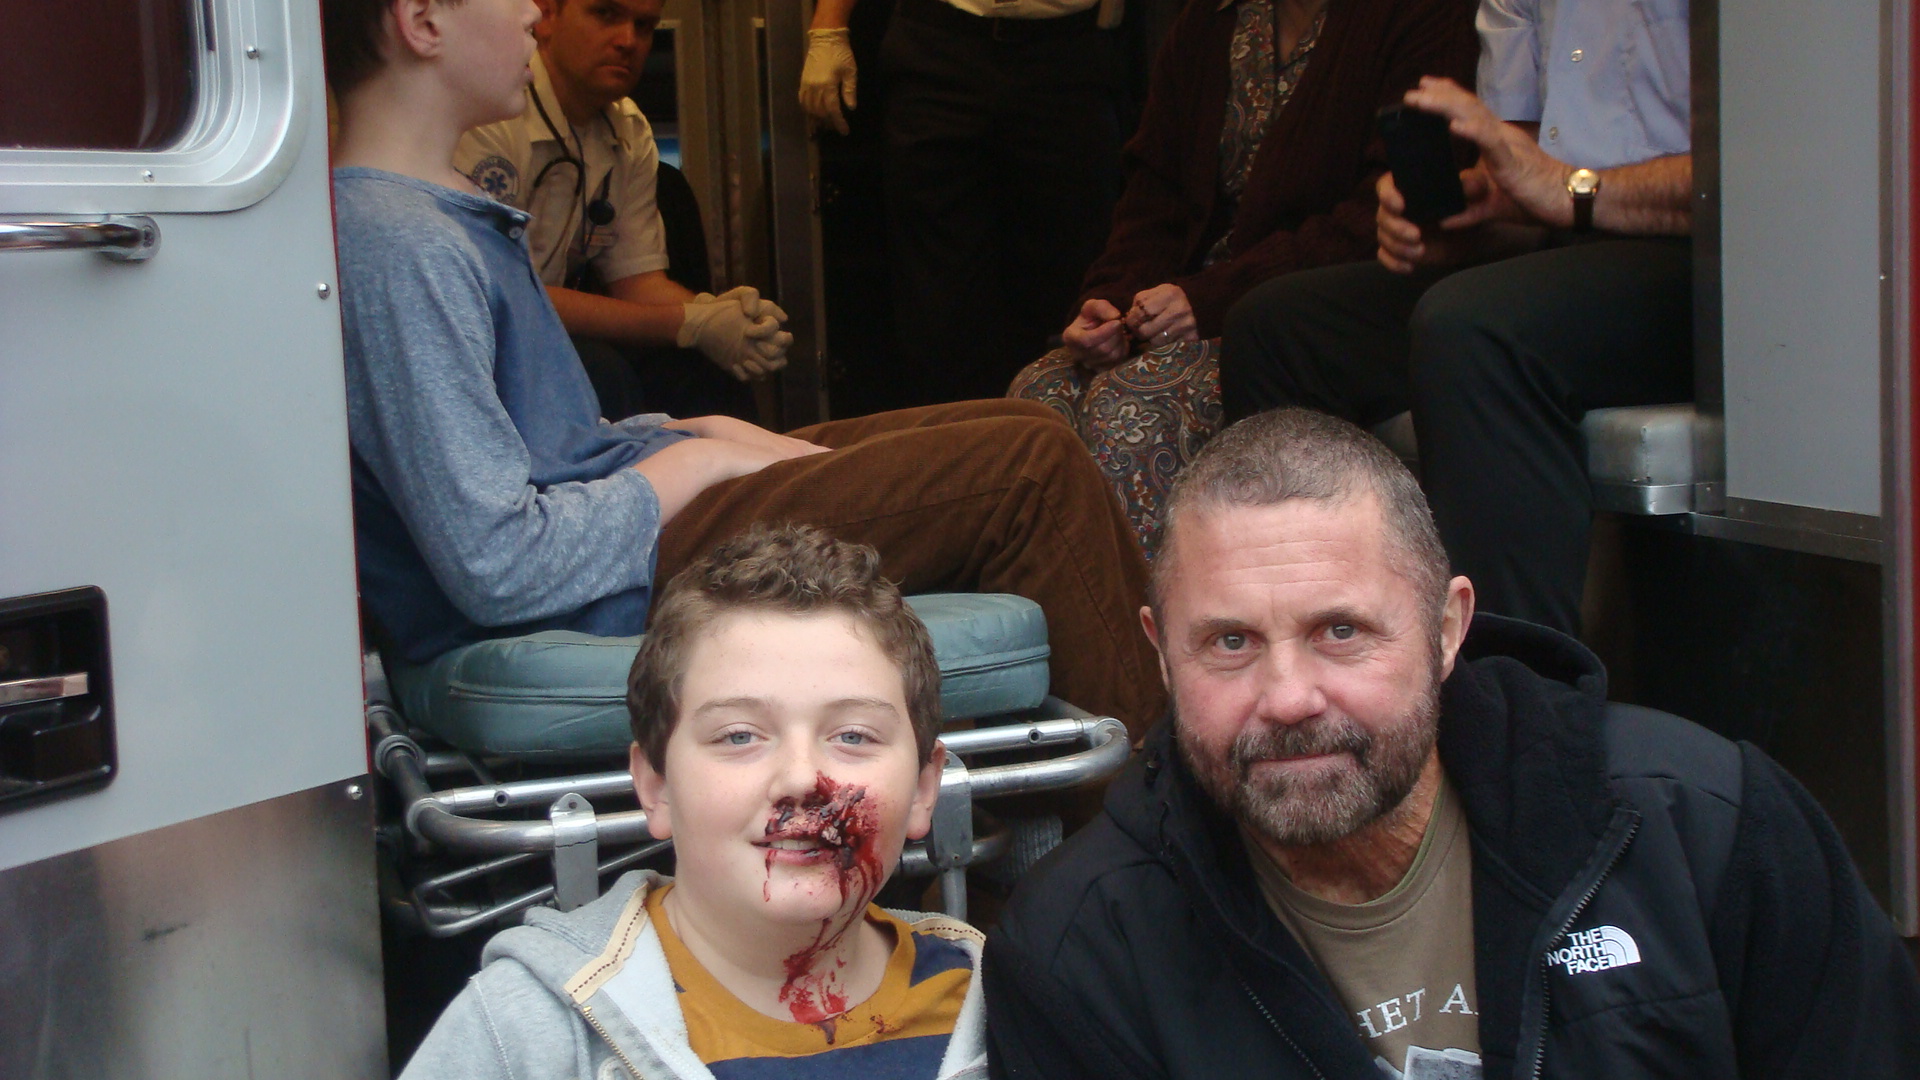 Luke Cawley as a young Kane Hodder